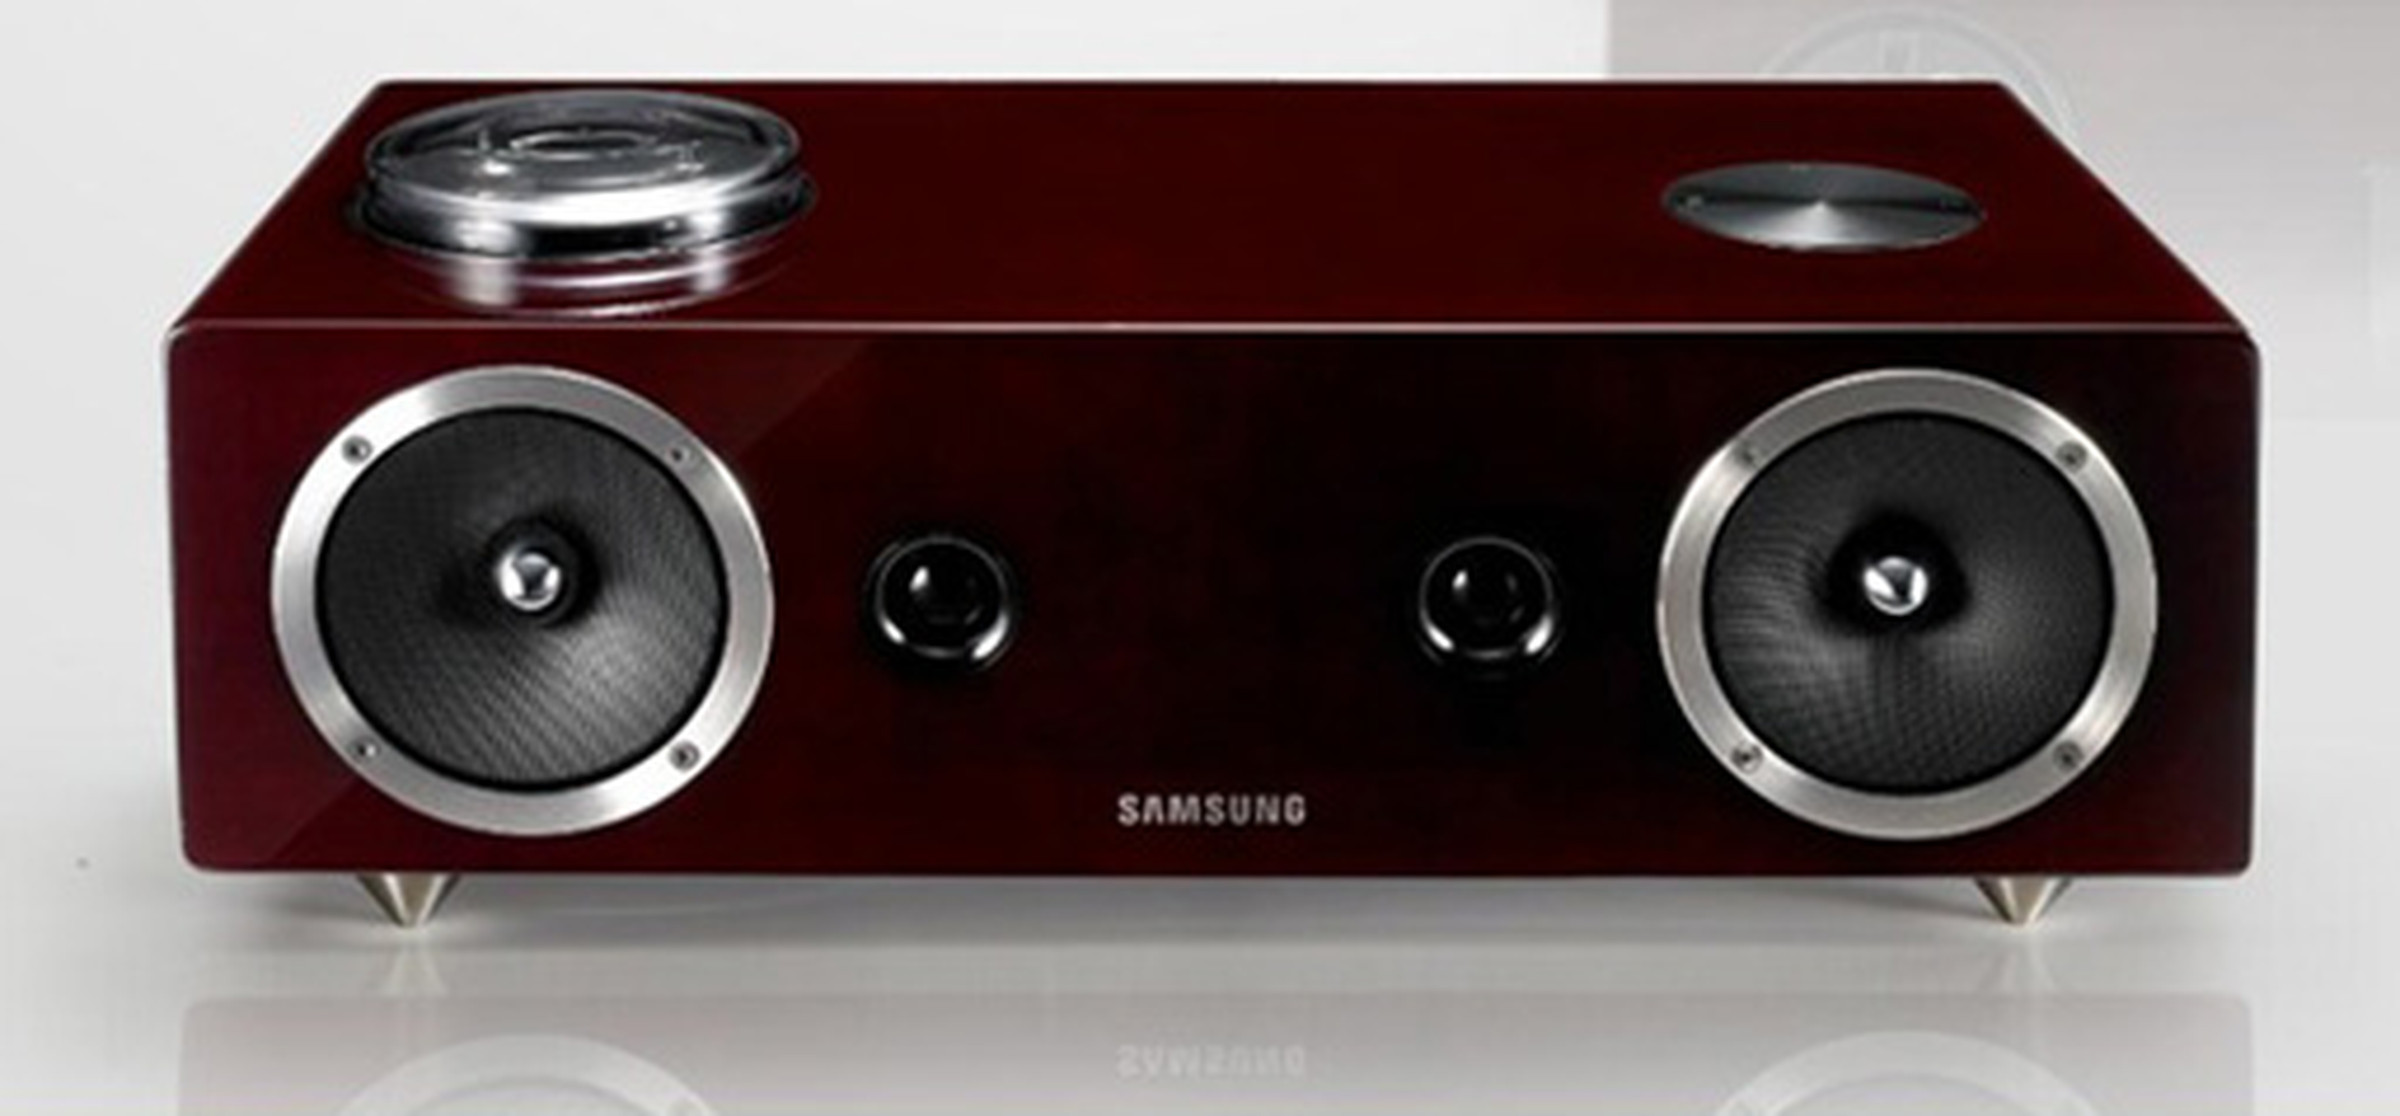 Samsung audio docks and home theater systems press photos